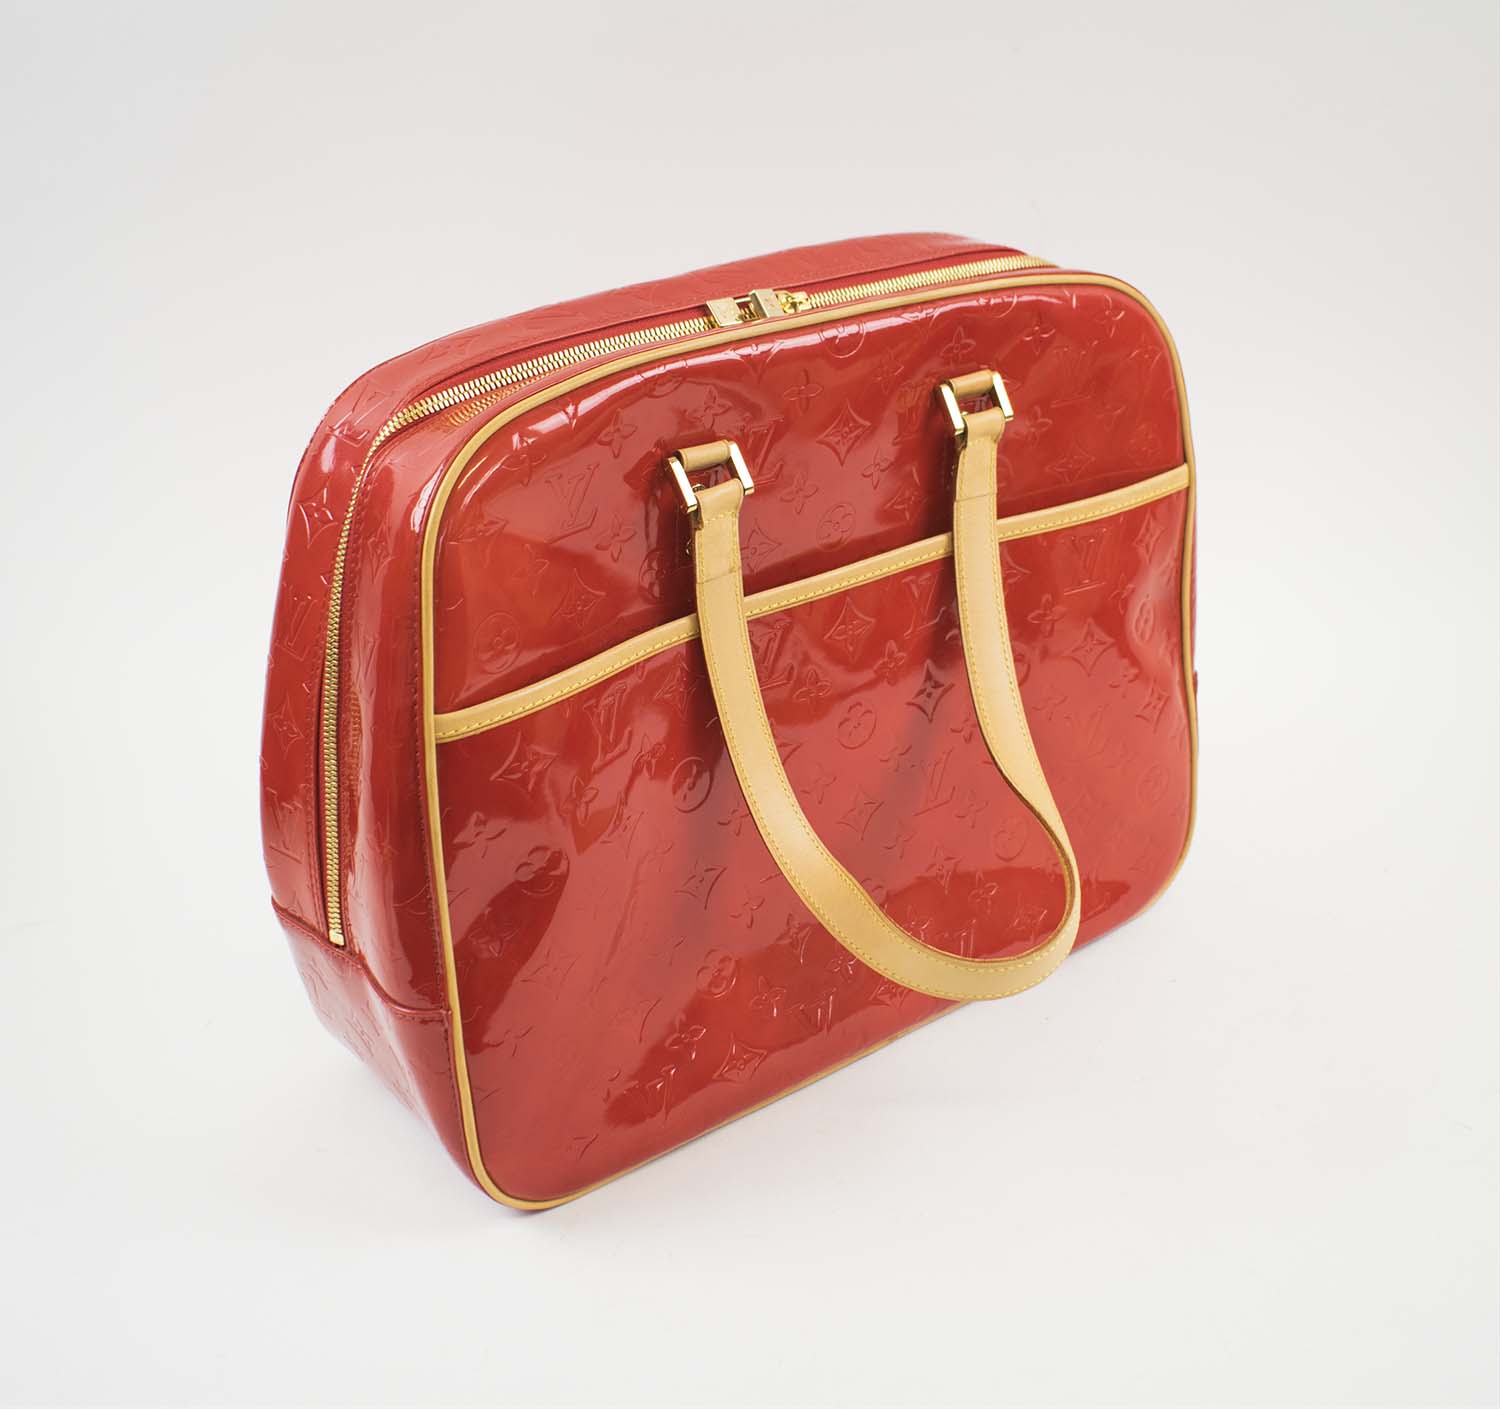 LOUIS VUITTON VERNIS RED MONOGRAM BAG, gold tone hardware, bottom feet,  leather trims and handles, full zip closure, external pocket, red leather  lining, 38cm x 32cm H x 14cm.